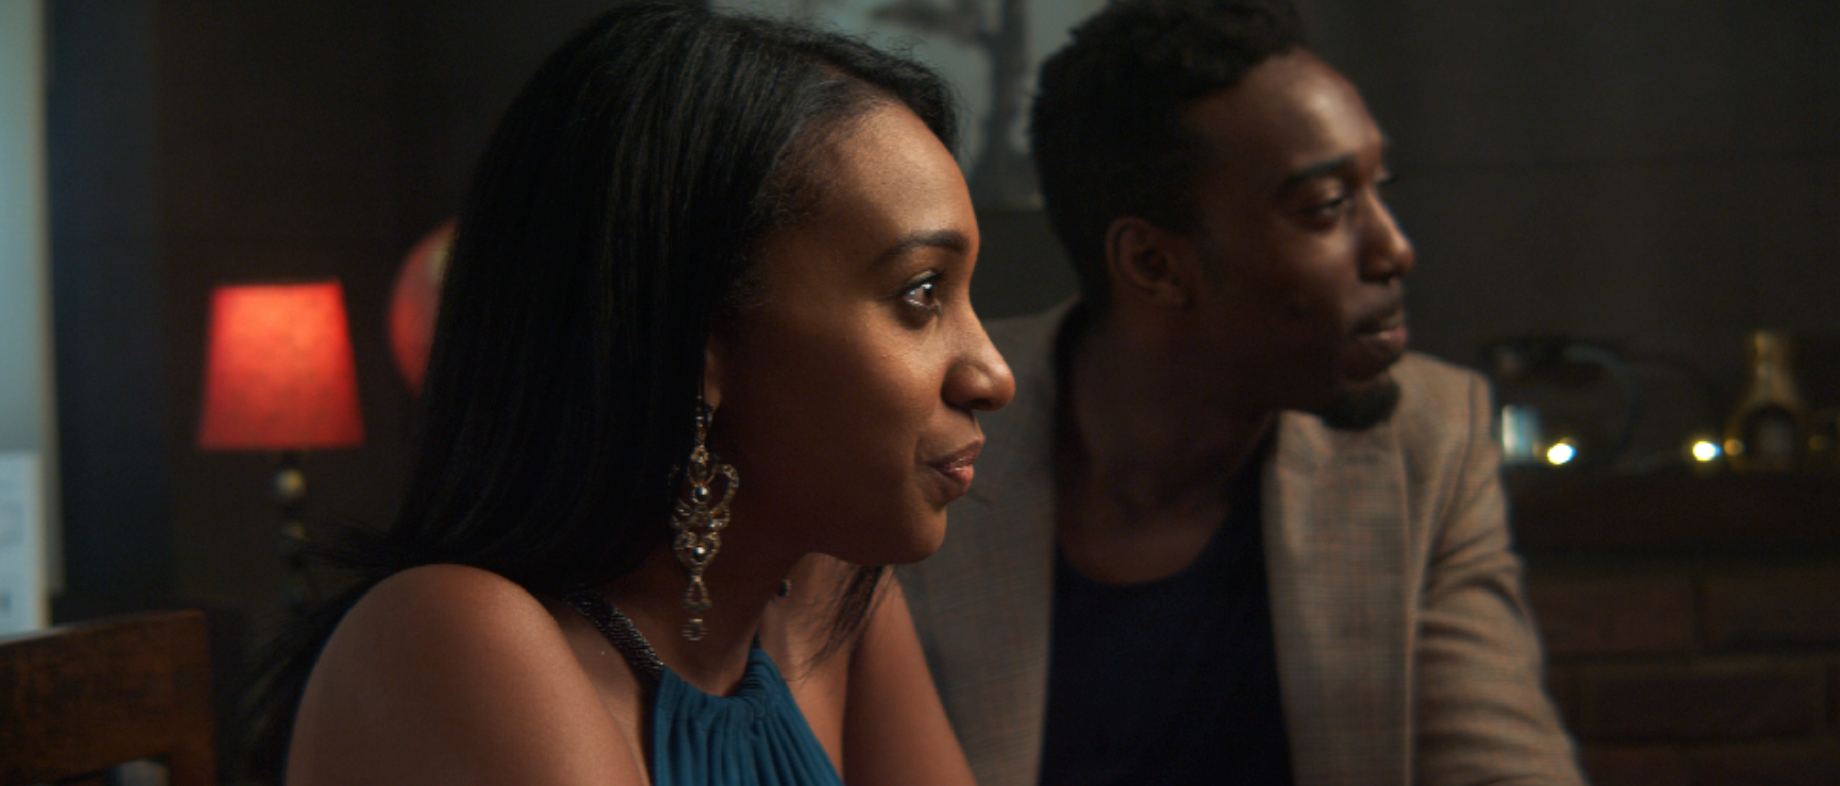 [Web Series] BWNG TV & Cardy Films join forces on new drama 'How Did We Get Here?'